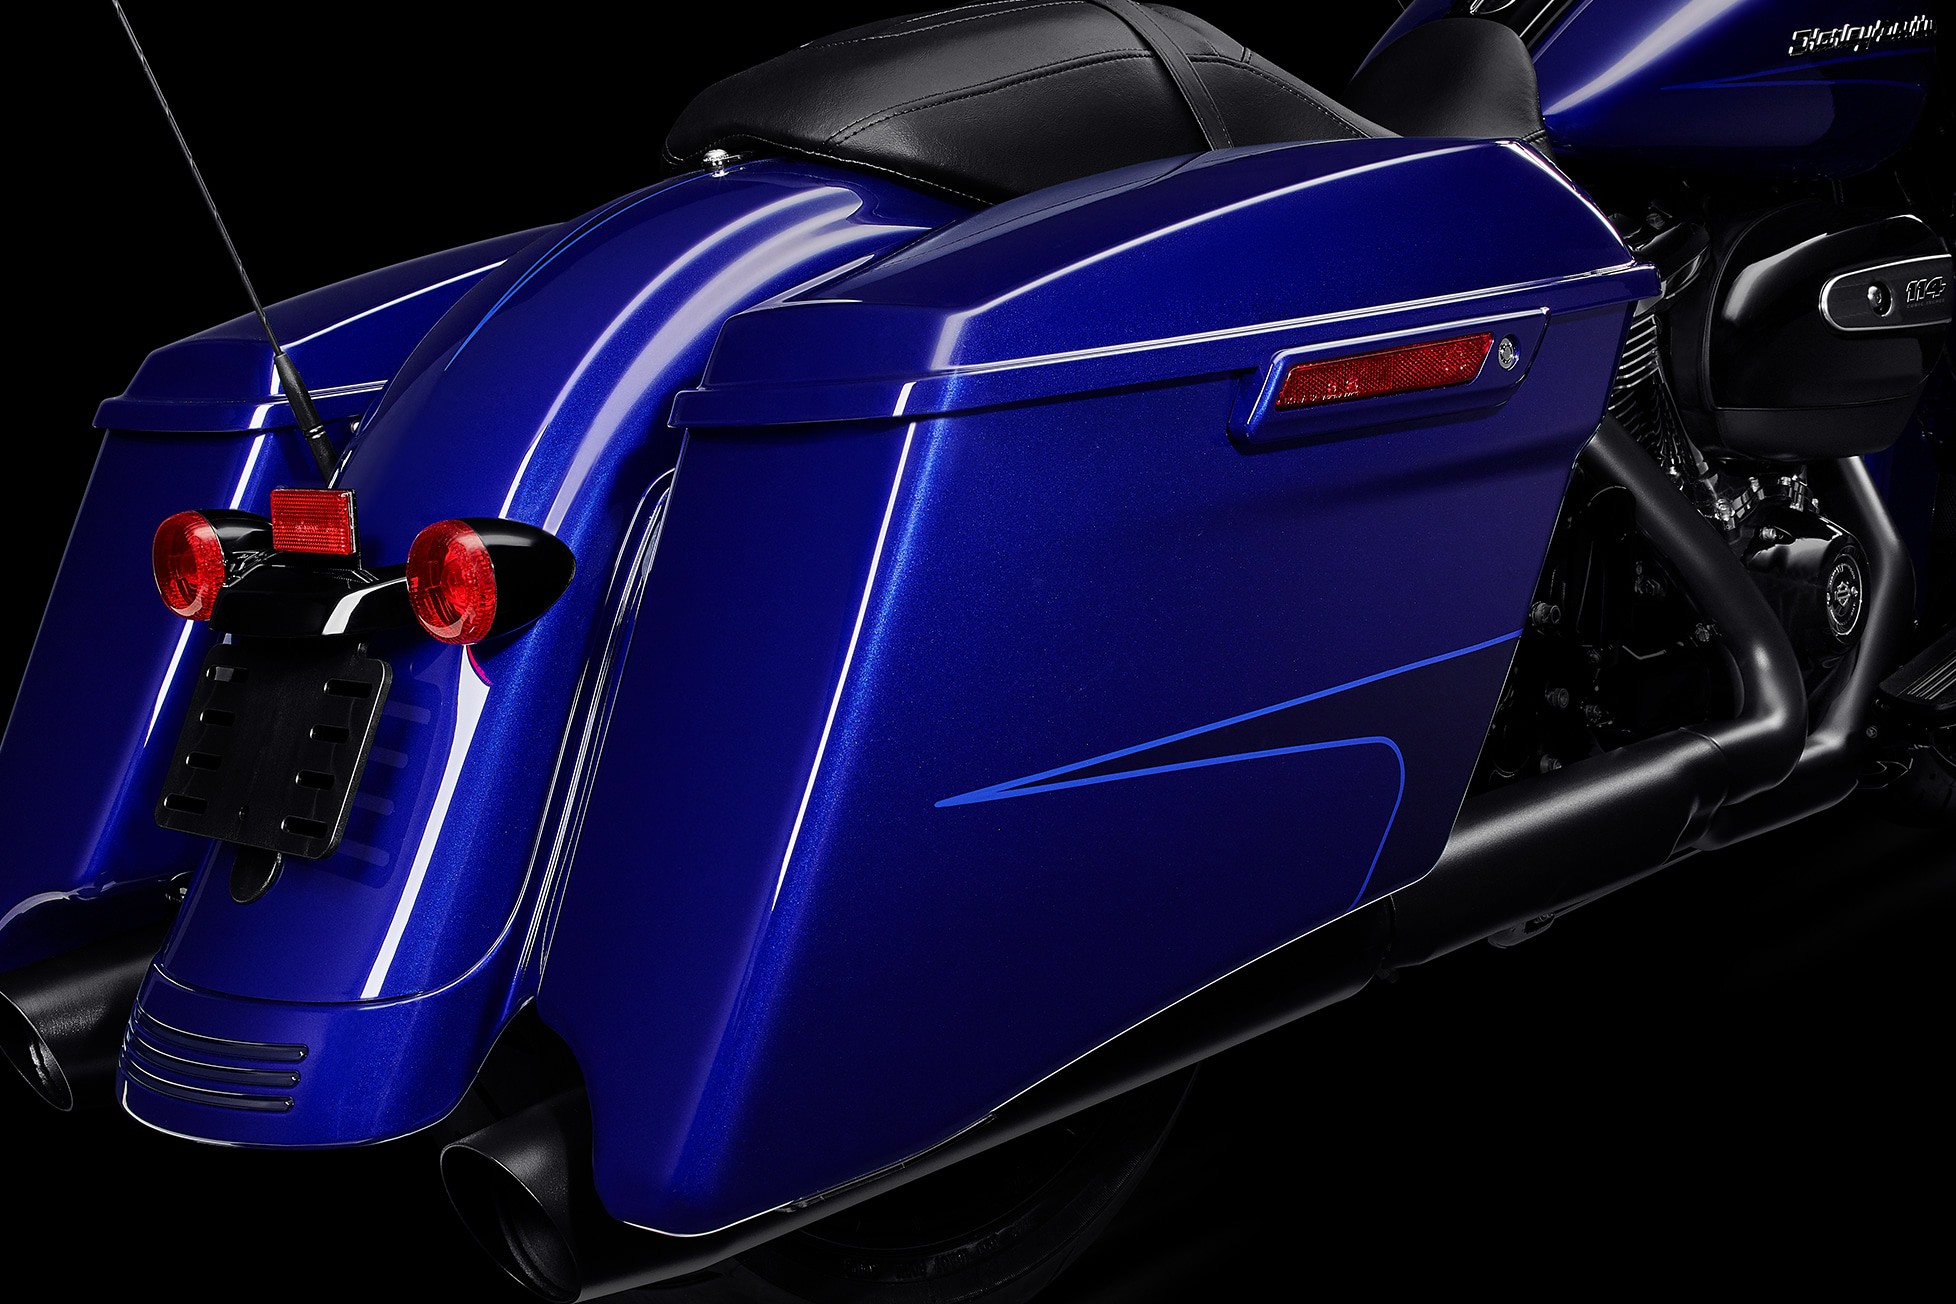 Harley-Davidson Touring Road Glide Special